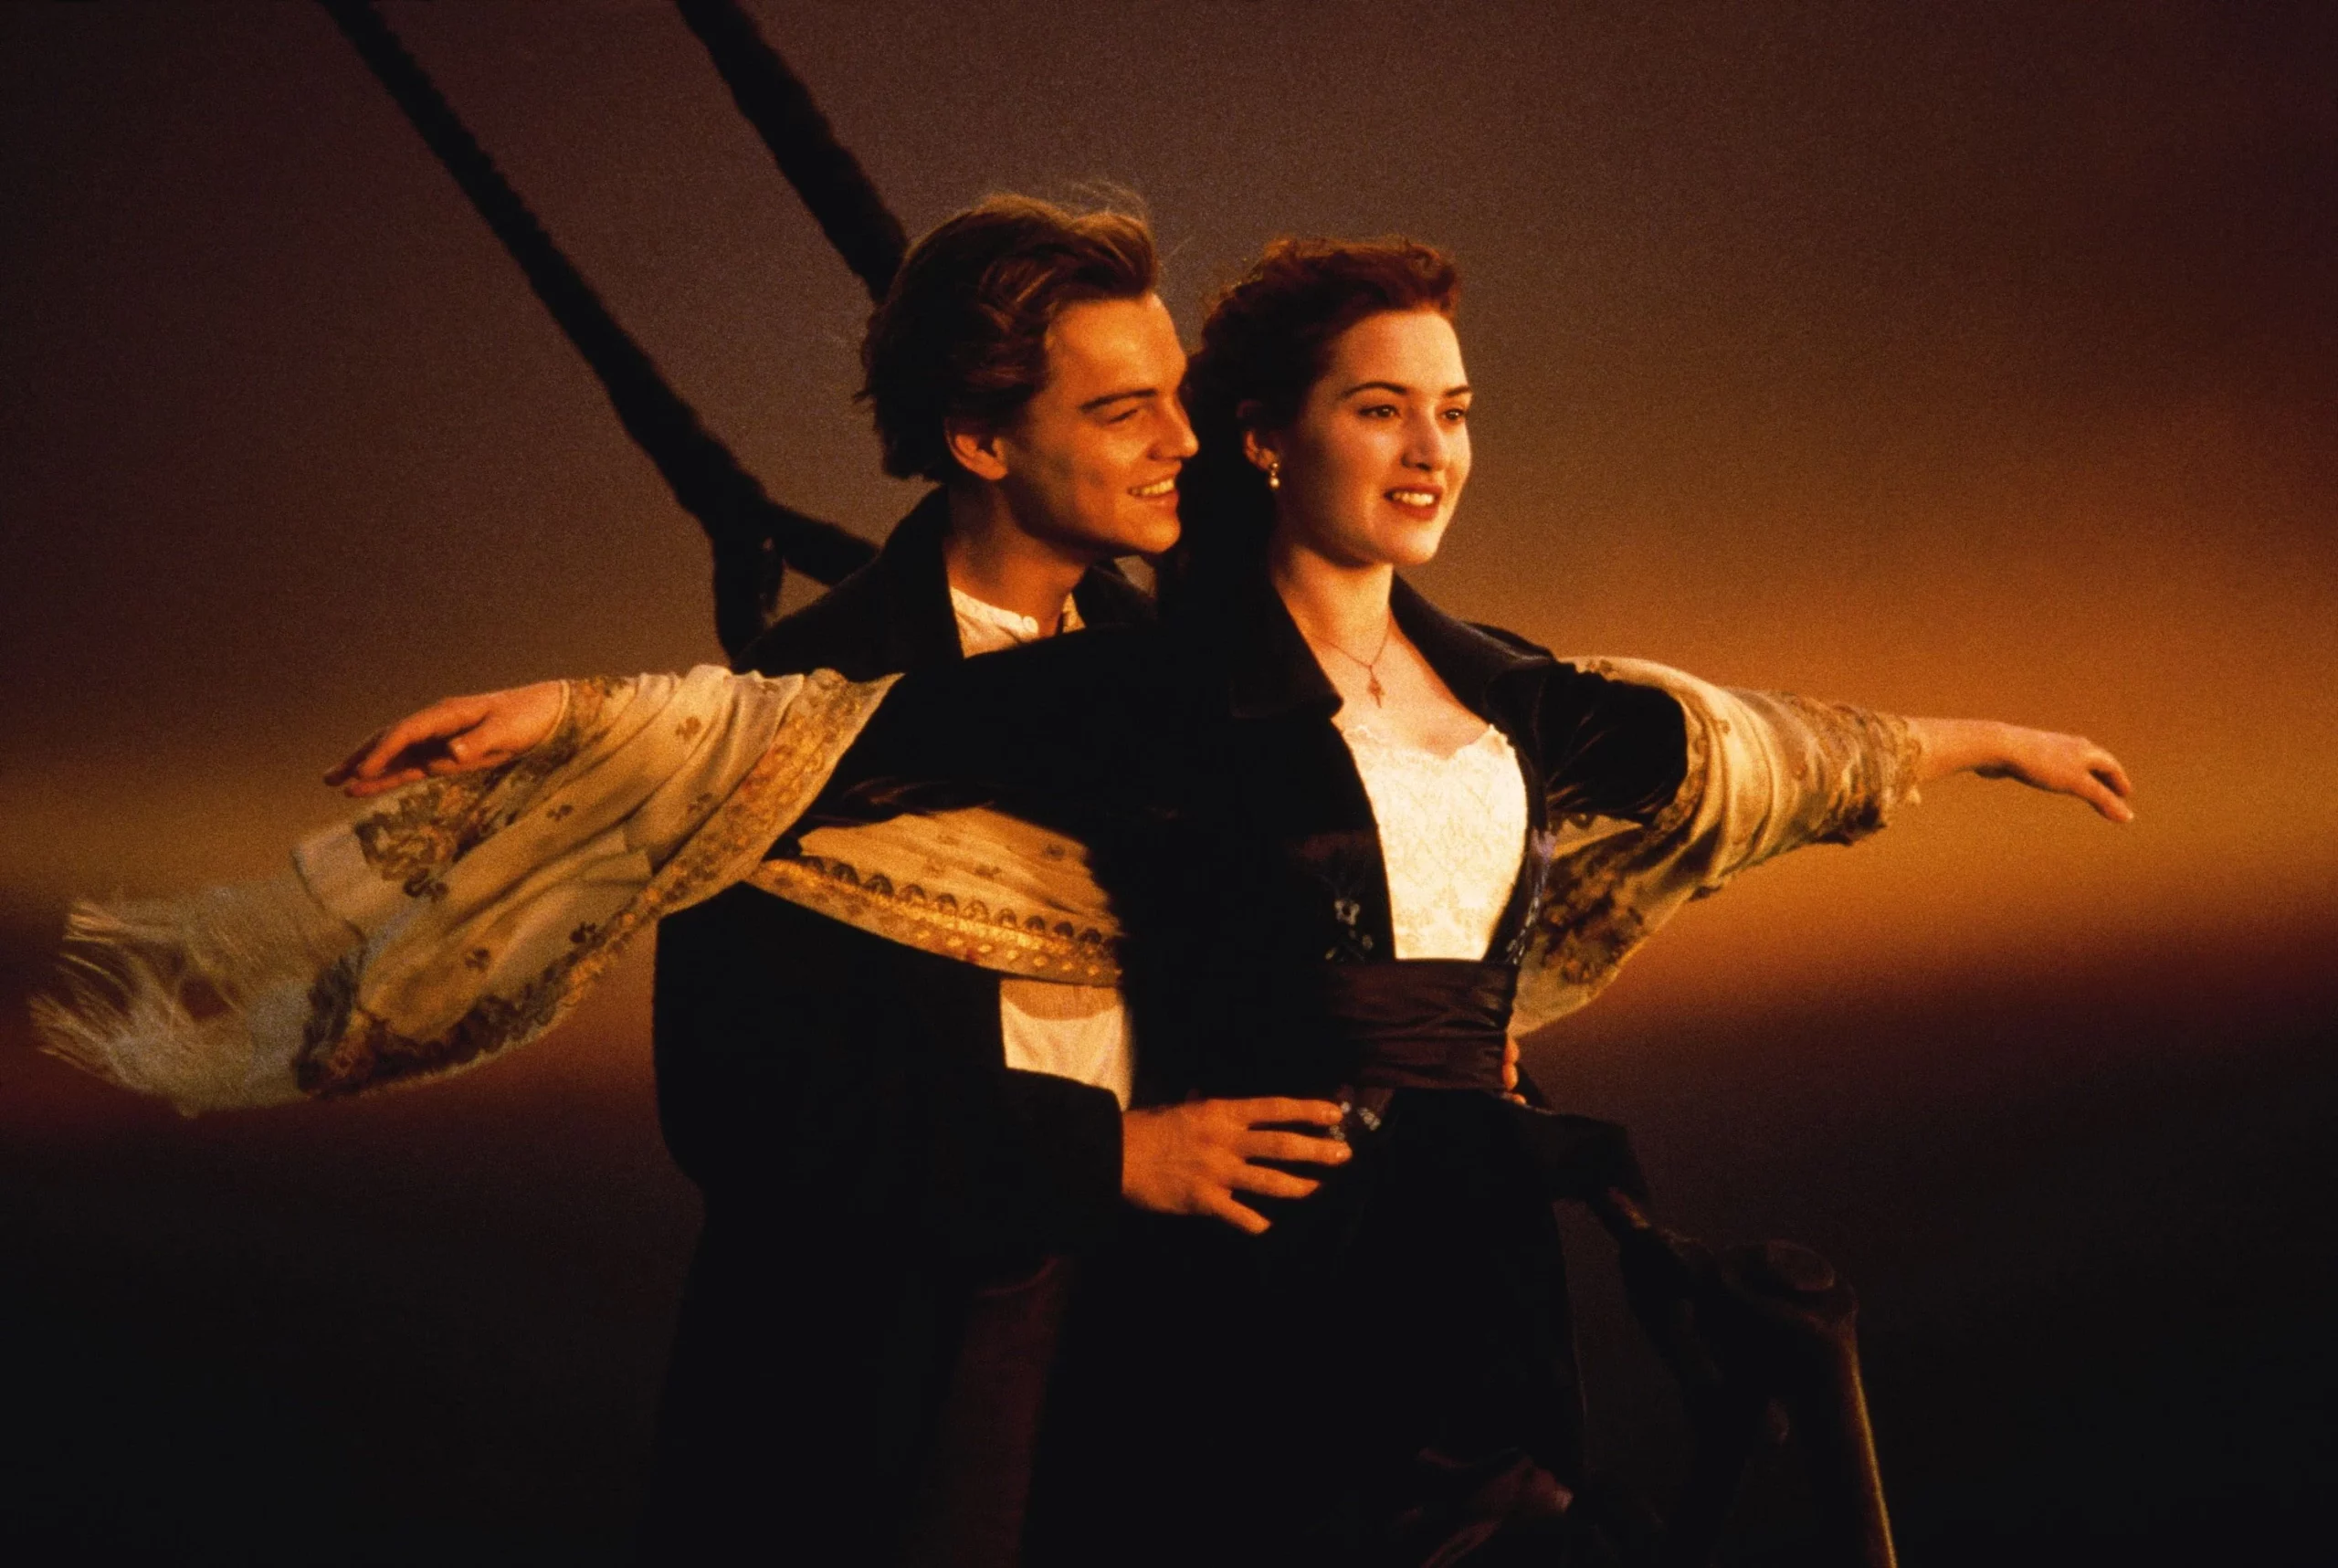 Kate Winslet and Leonardo DiCaprio from Titanic